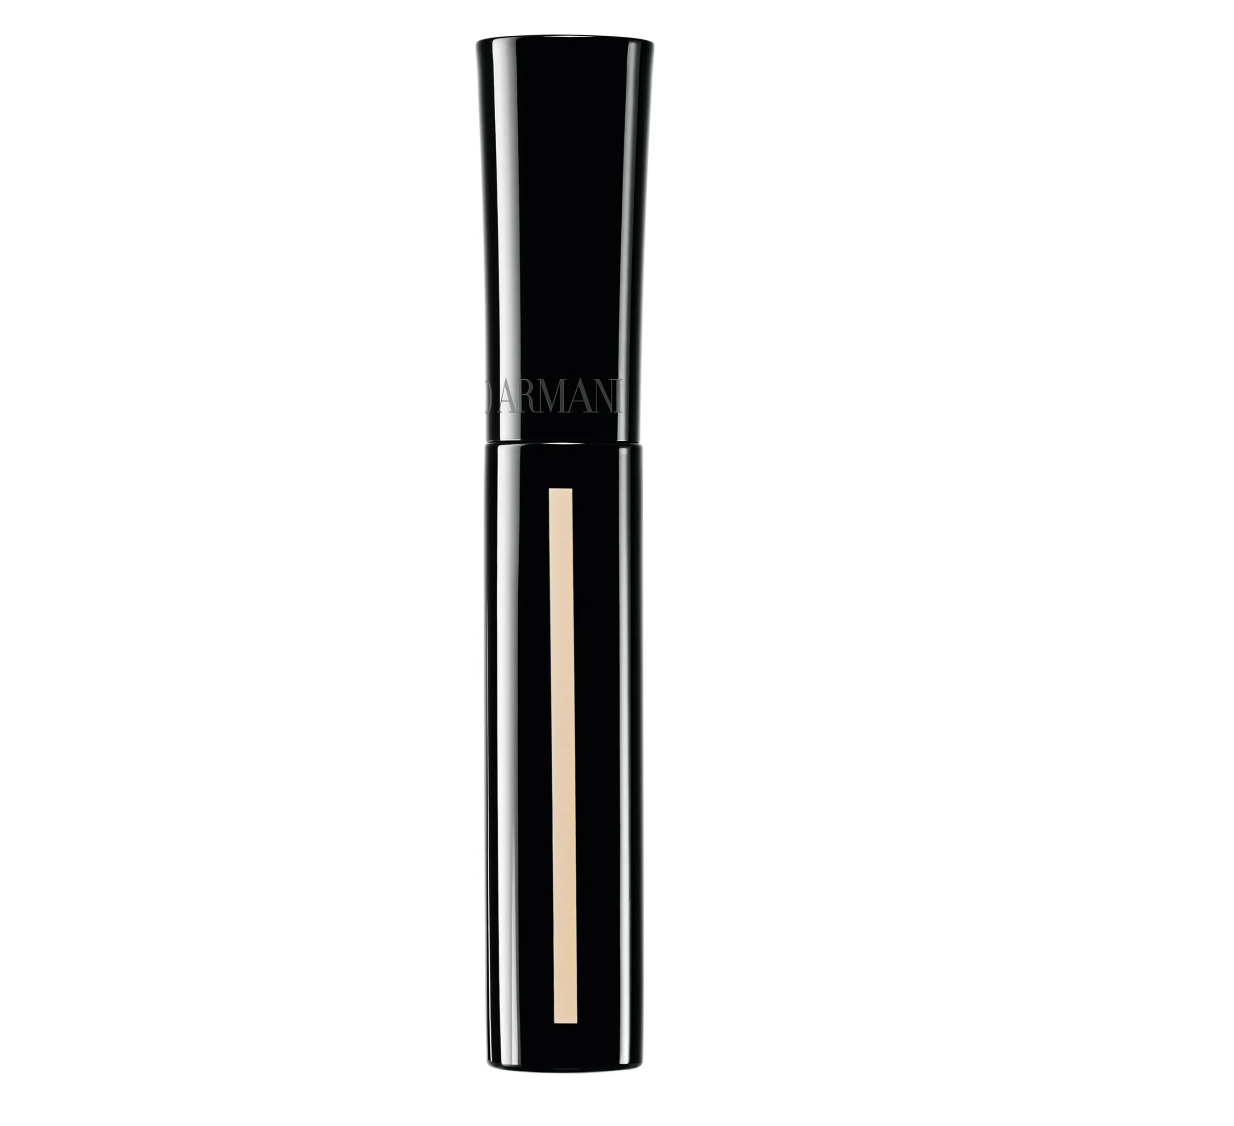 High Precision Retouch Concealer